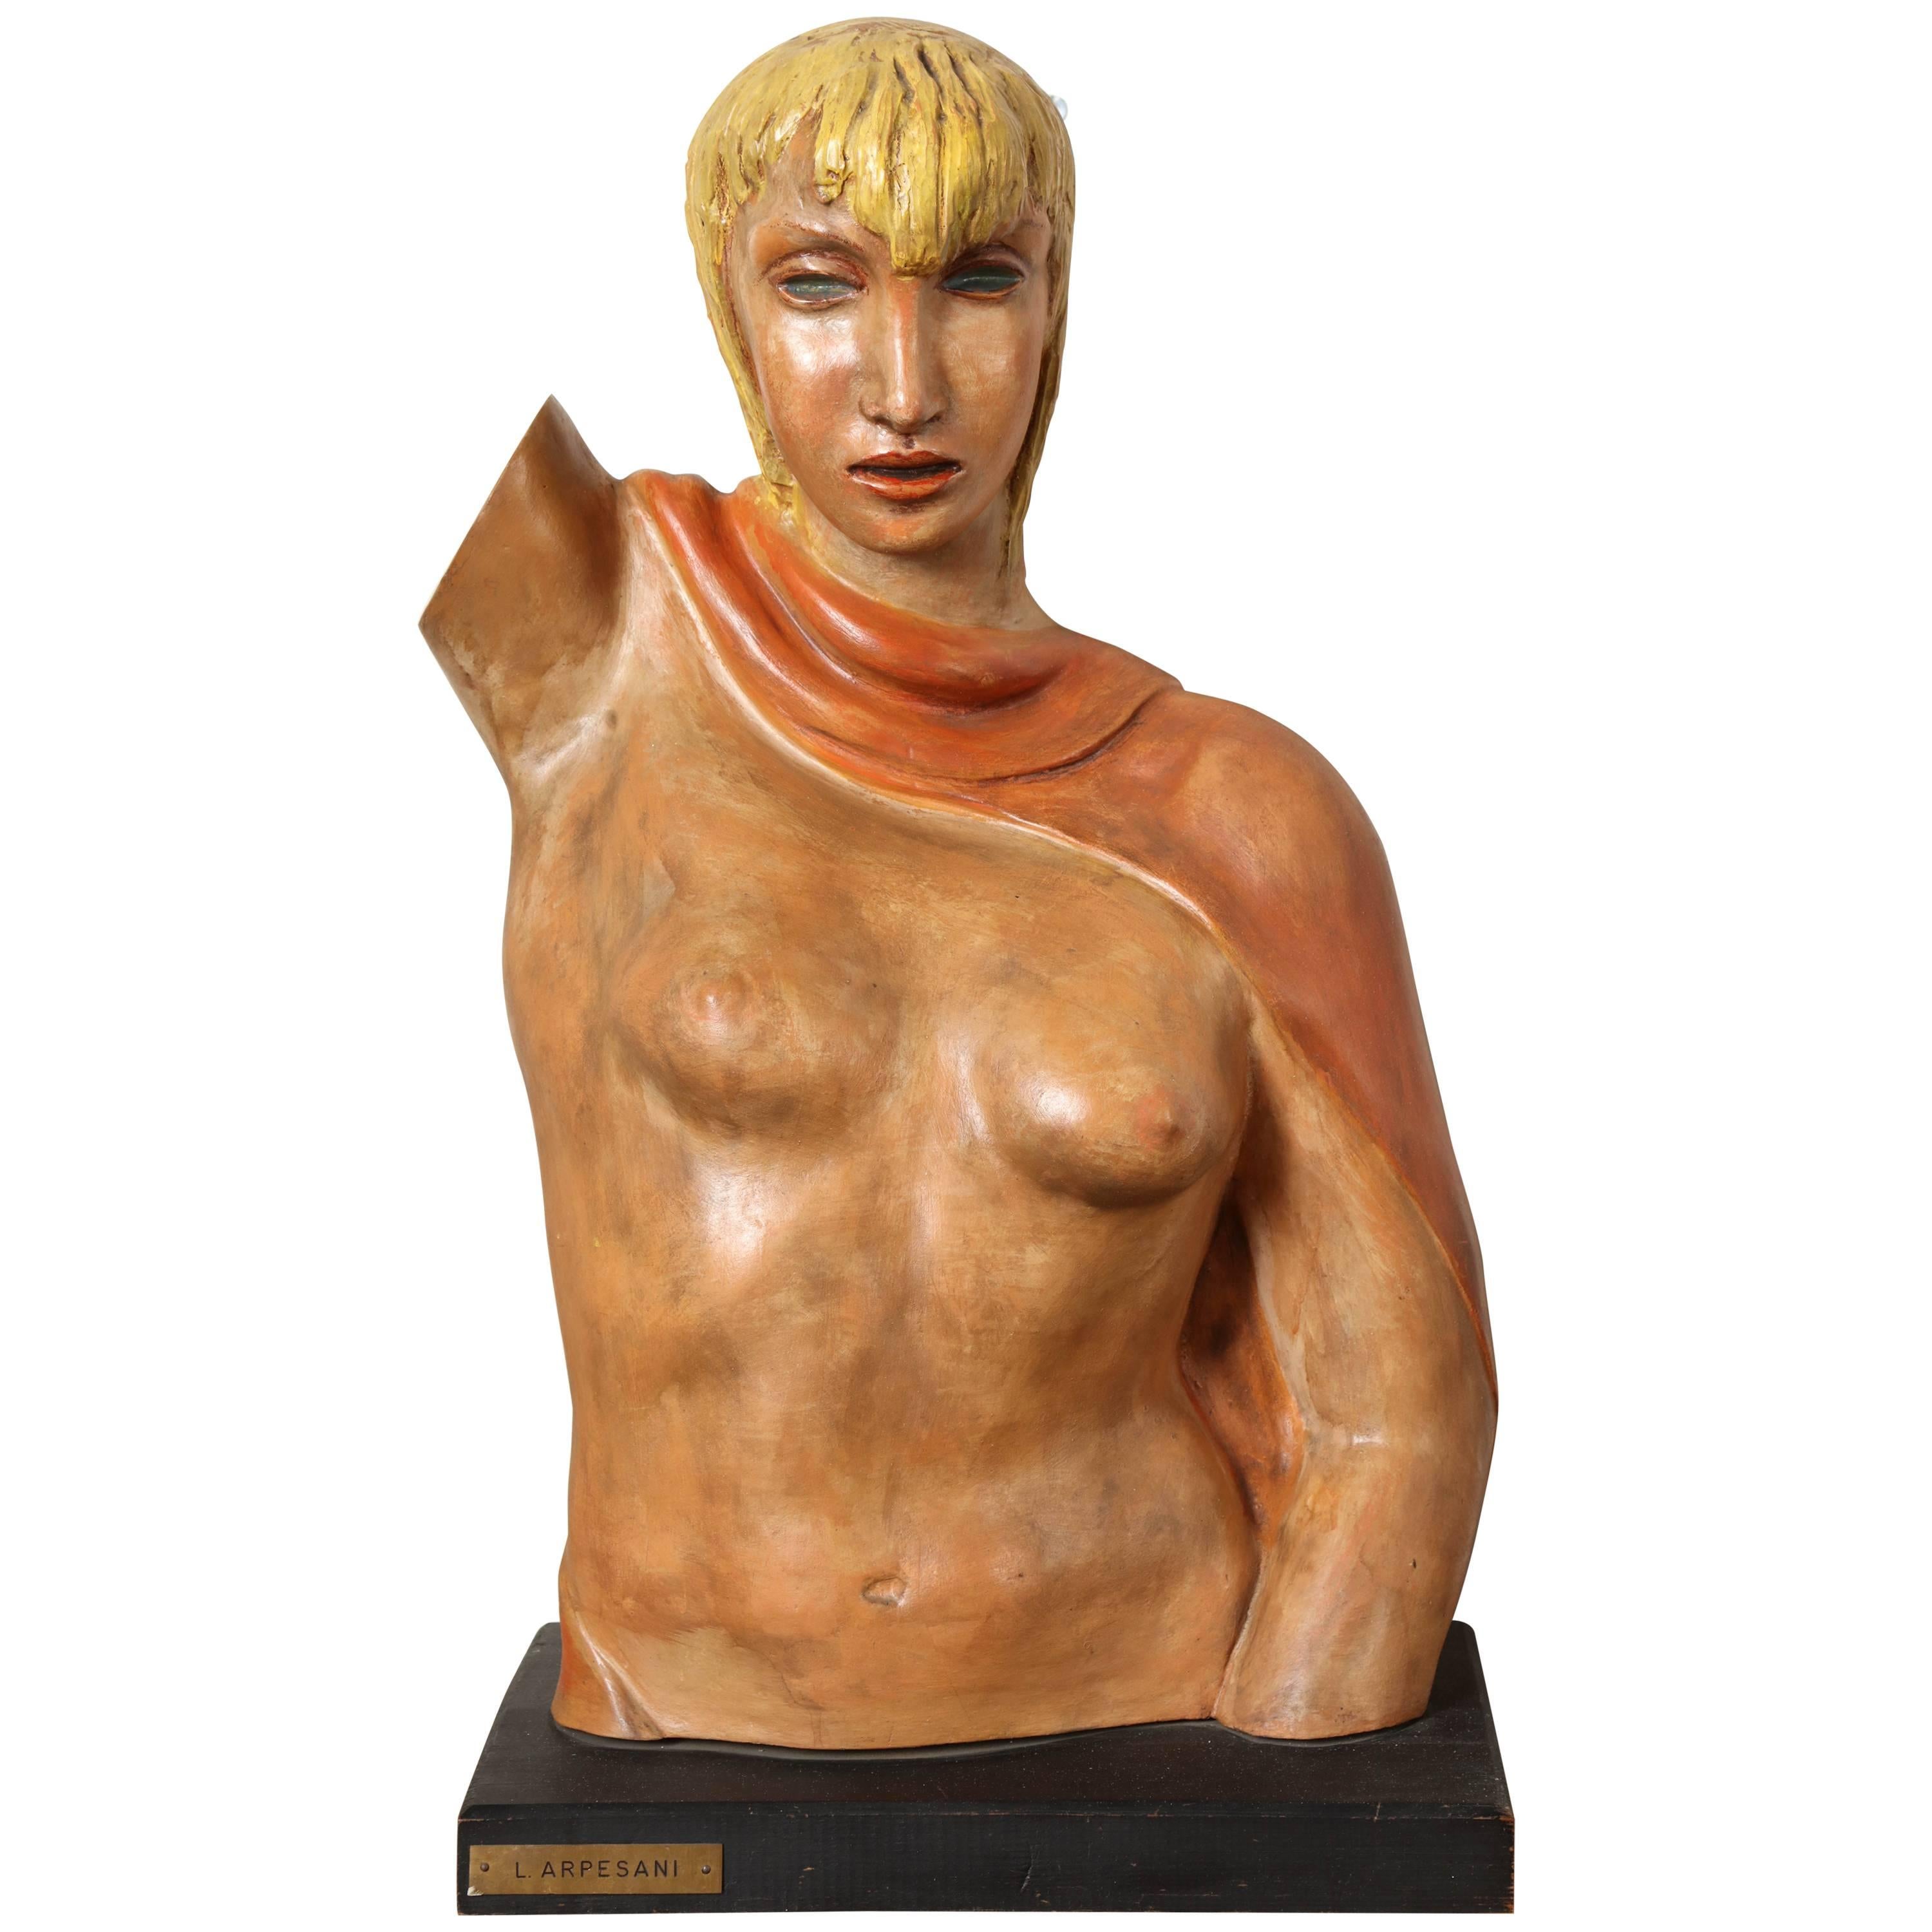  Lina Arpesani sculpture of a woman made in Italy 1930 For Sale